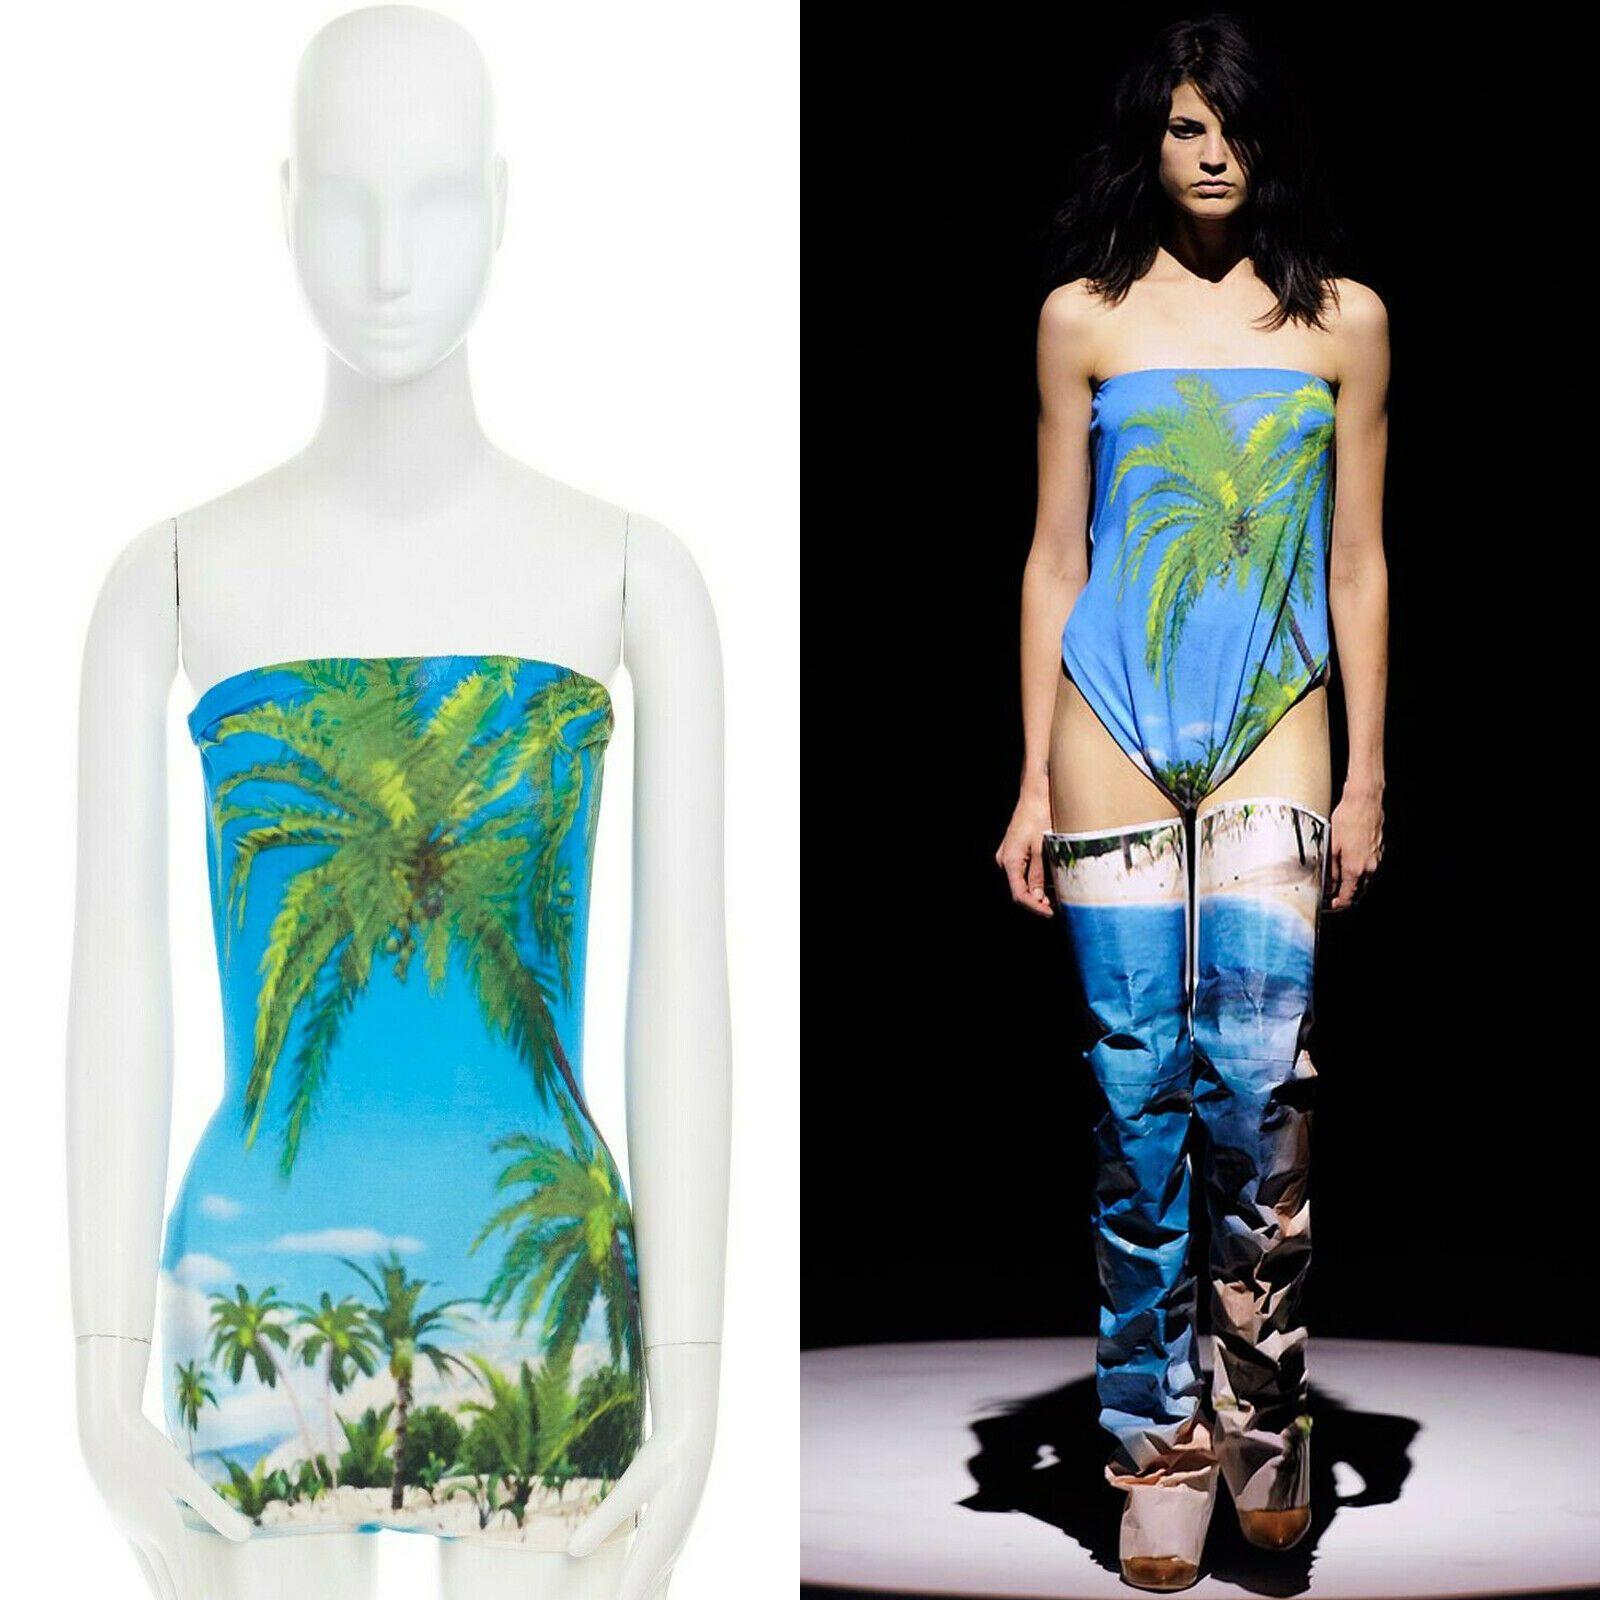 runway MARTIN MARGIELA SS10 tropical palm print backless bodysuit romper IT38 XS

MAISON MARTIN MARGIELA
FROM THE SPRING SUMMER 2010 RUNWAY
White rayon. Blue ad green tropical palm tree scenic print at front. Strapless top. Bodysuit romper. 
Open